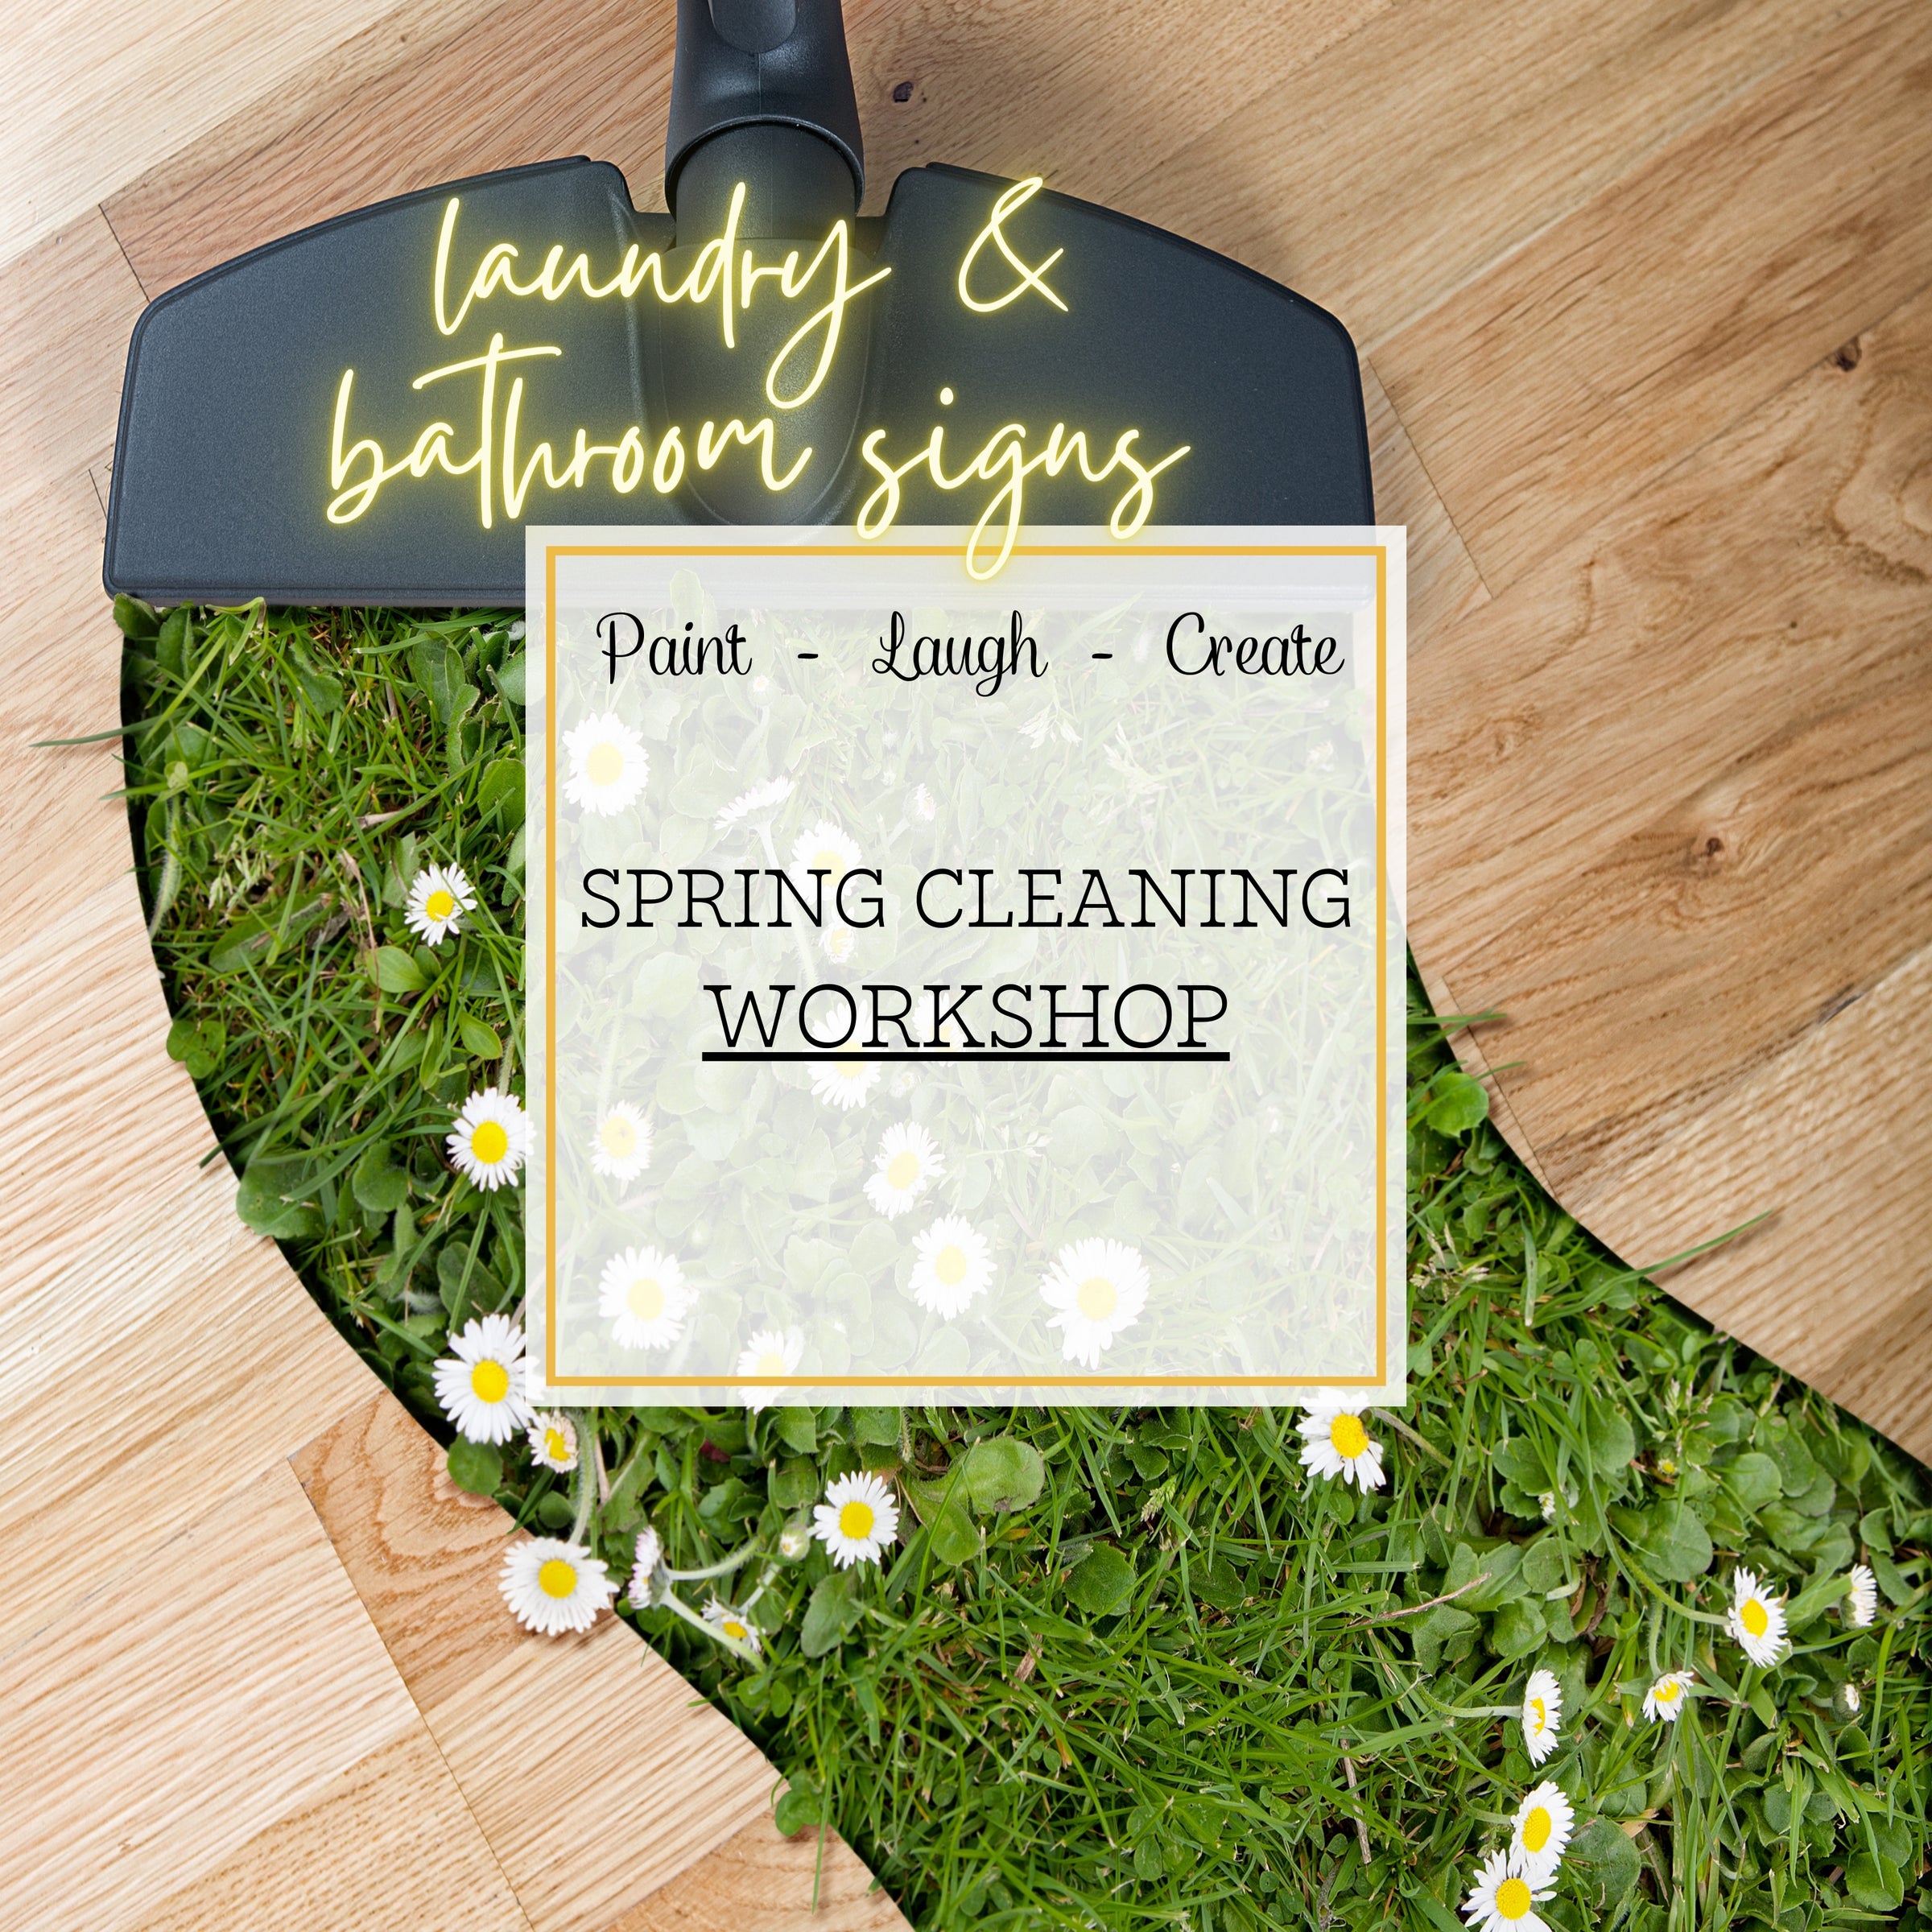 SPRING CLEANING WORKSHOP - LAUNDRY & BATH - MAY16TH, 6:00PM